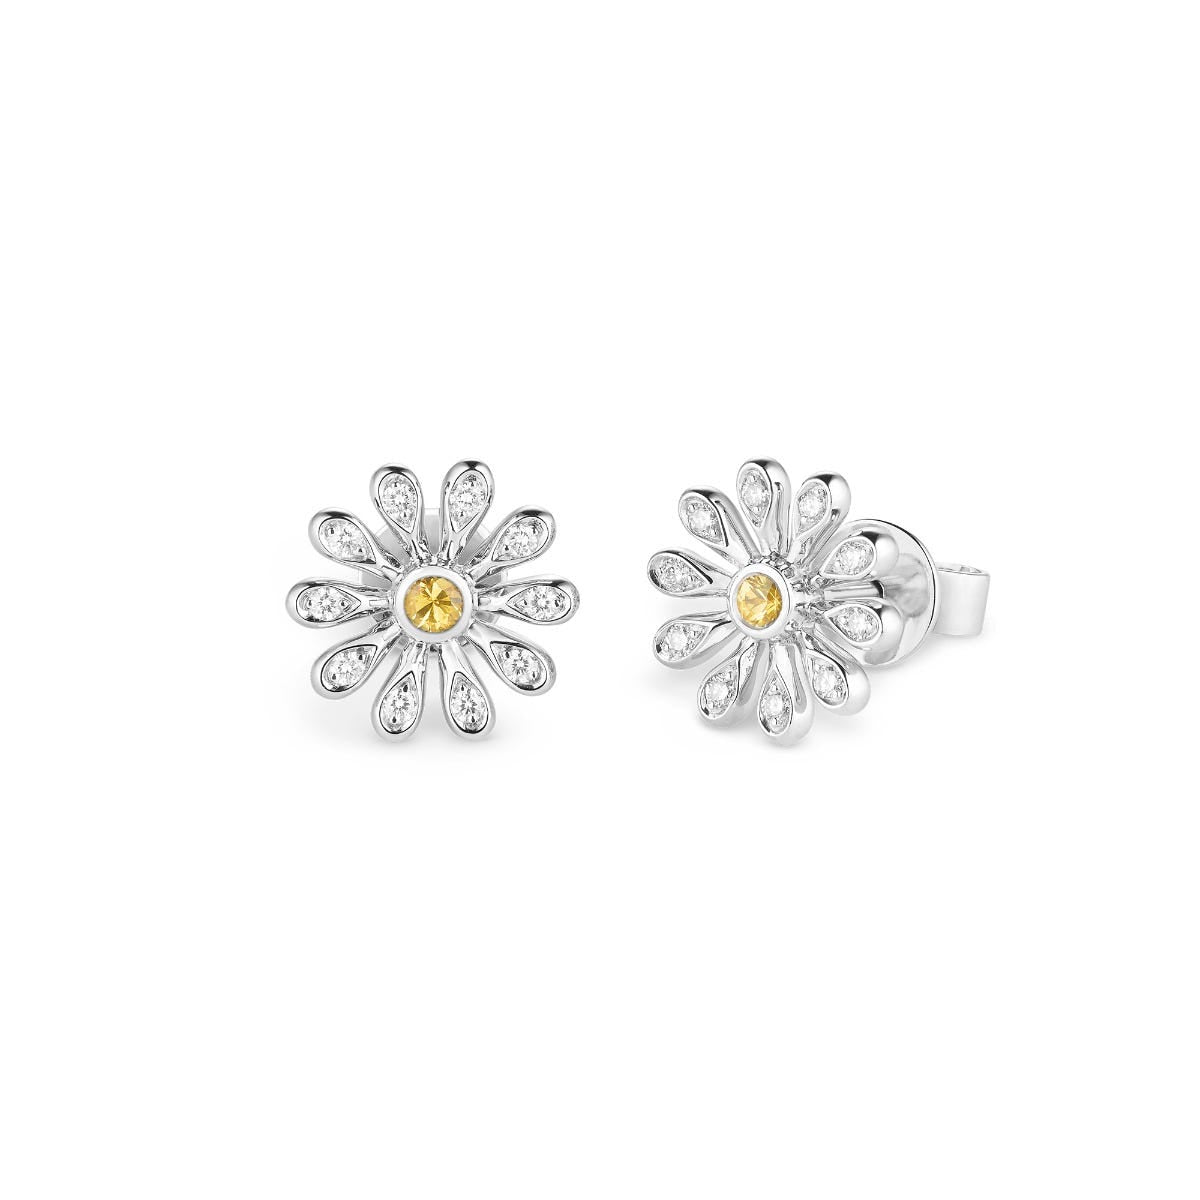 Mini Daisy Large Earrings in 18ct White Gold with Yellow Sapphire and Diamonds